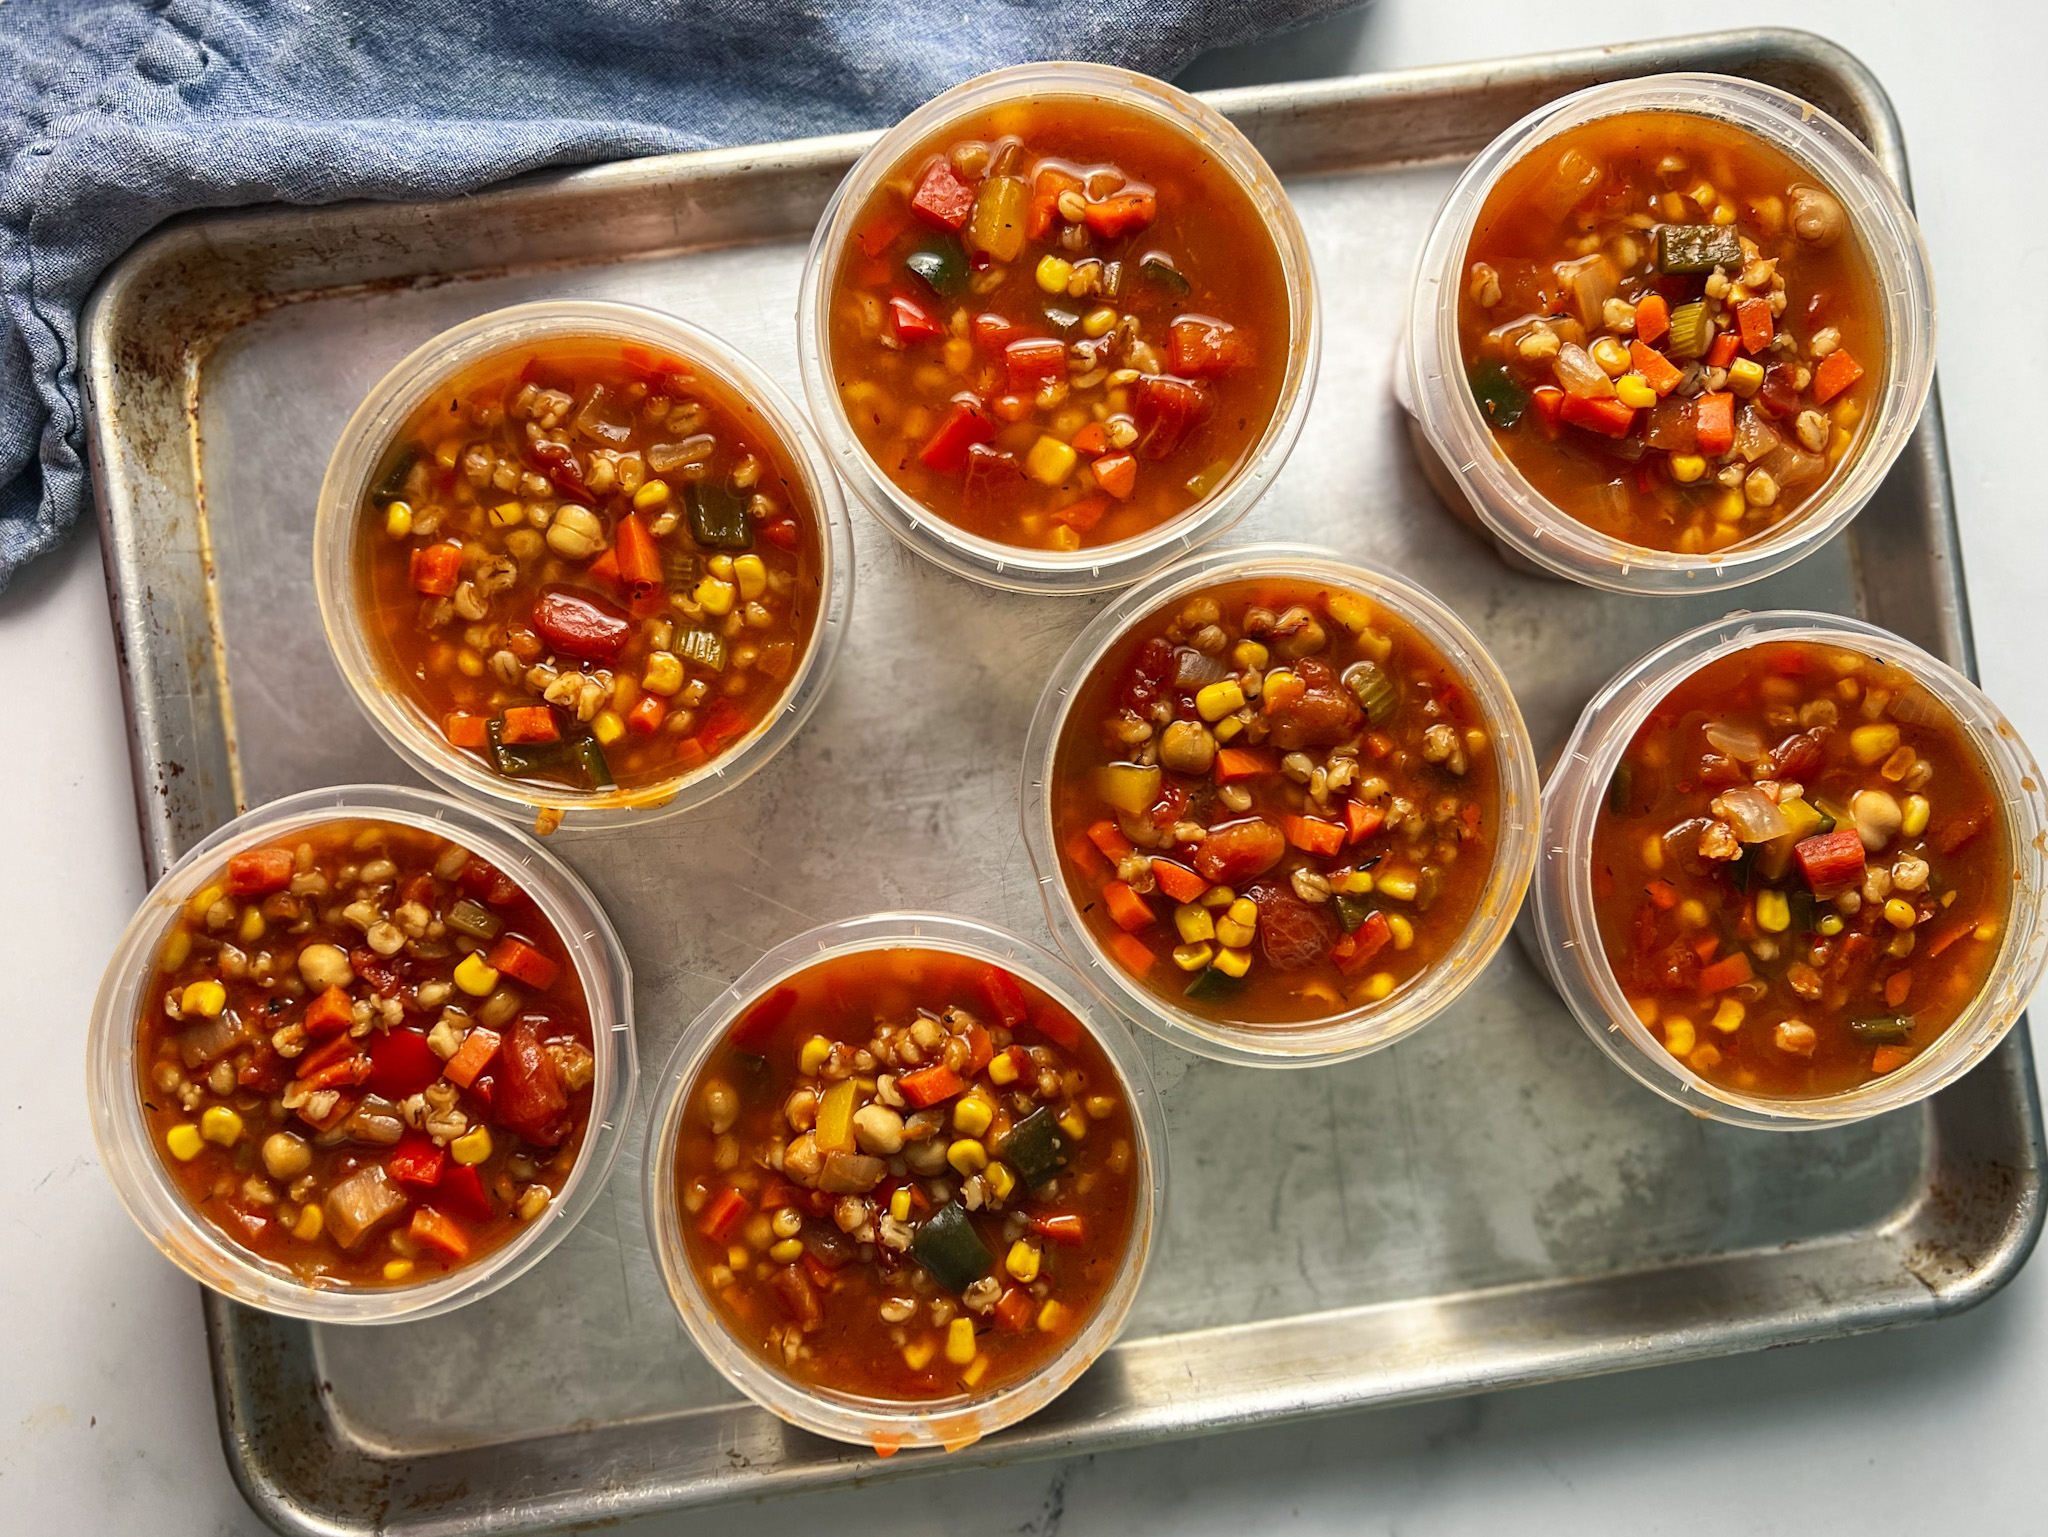 leftover panera 10 vegetable soup in containers on a tray